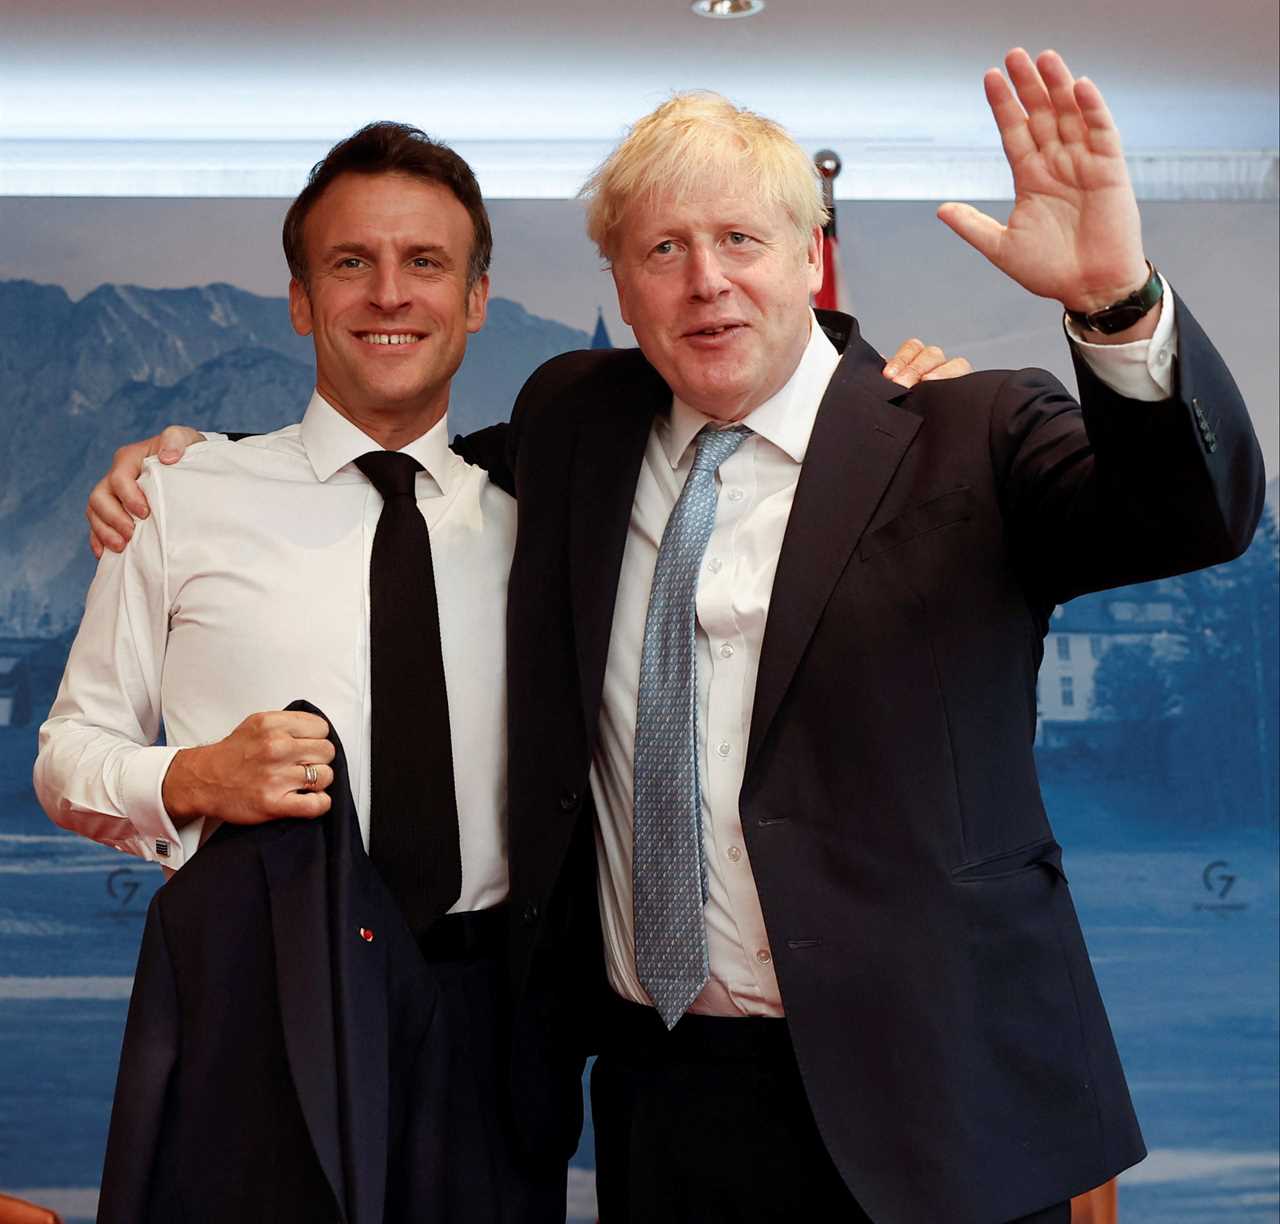 Boris Johnson’s bromance with Emmanuel Macron is back on with back-slapping display at the G7 but PM swerves Brexit row